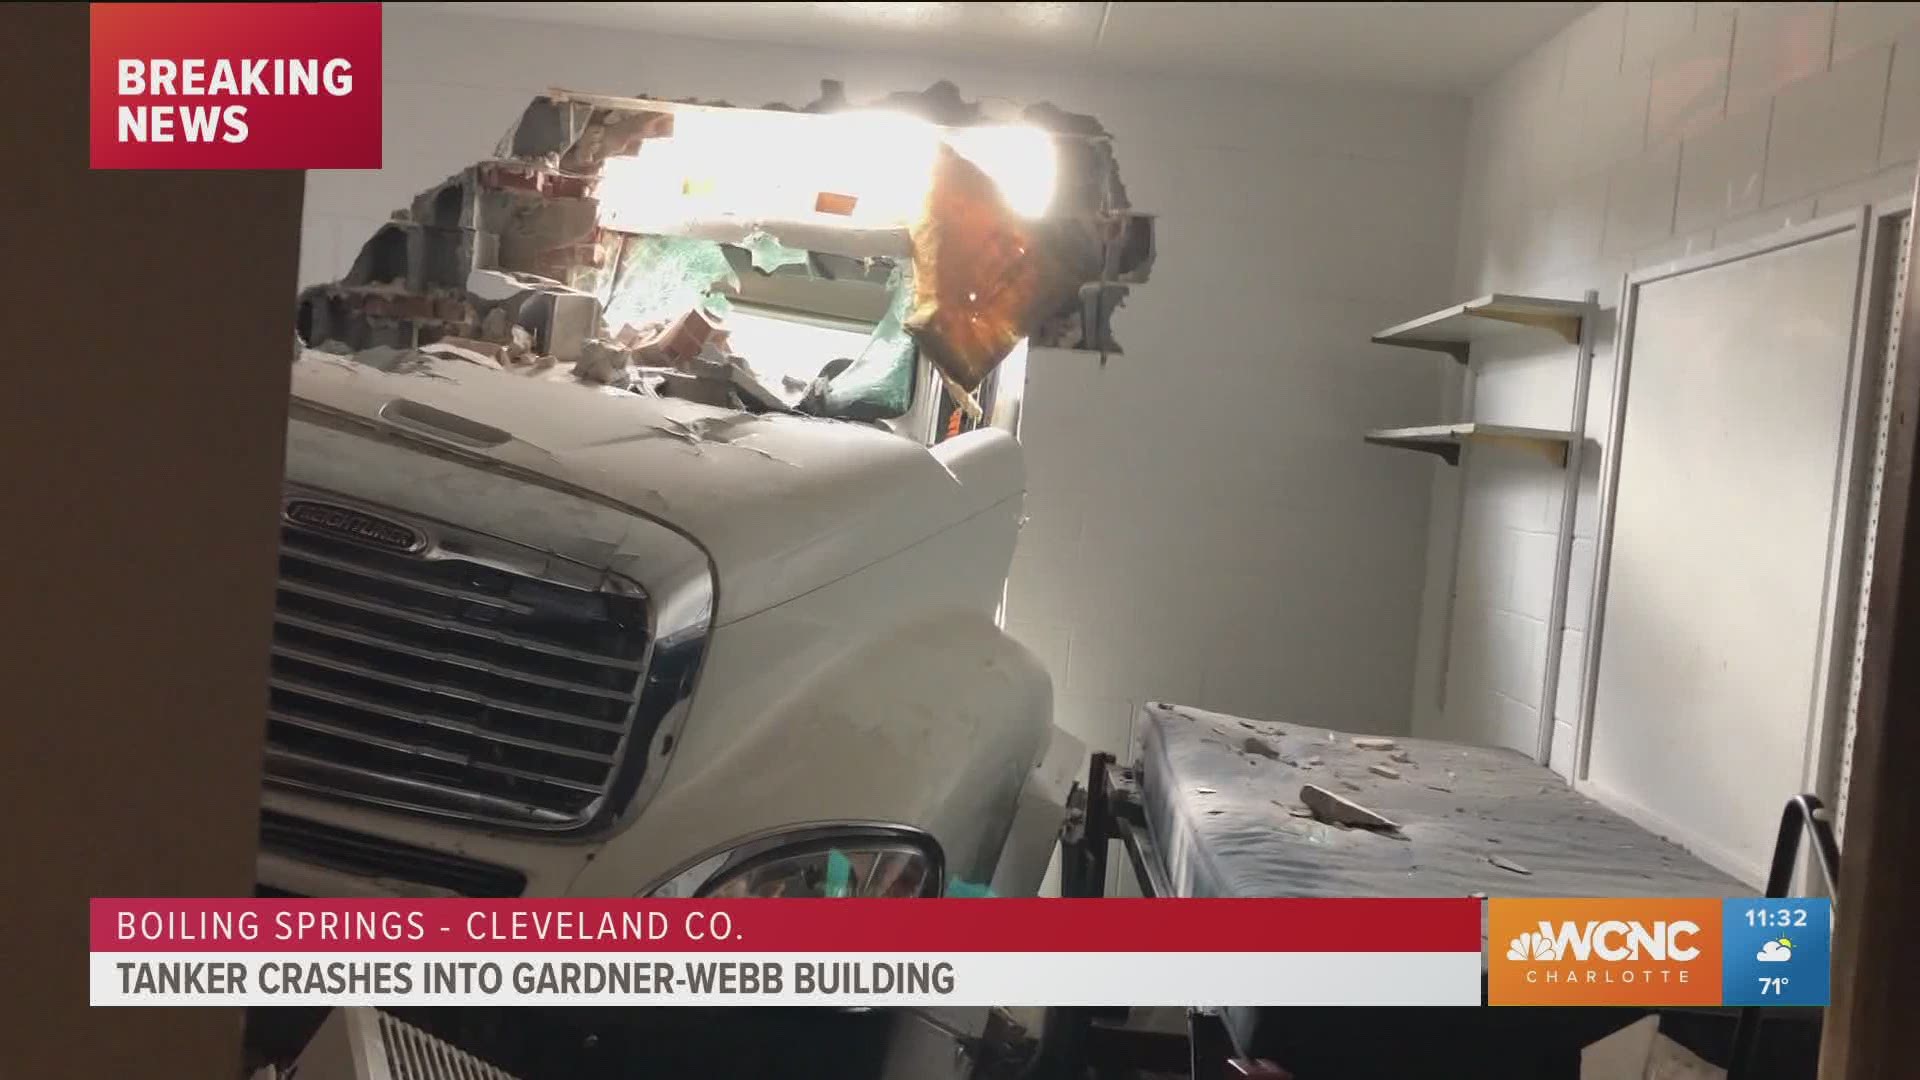 Police are investigating what happened that caused a tractor-trailer to crash into a building at Gardner-Webb University Monday morning.